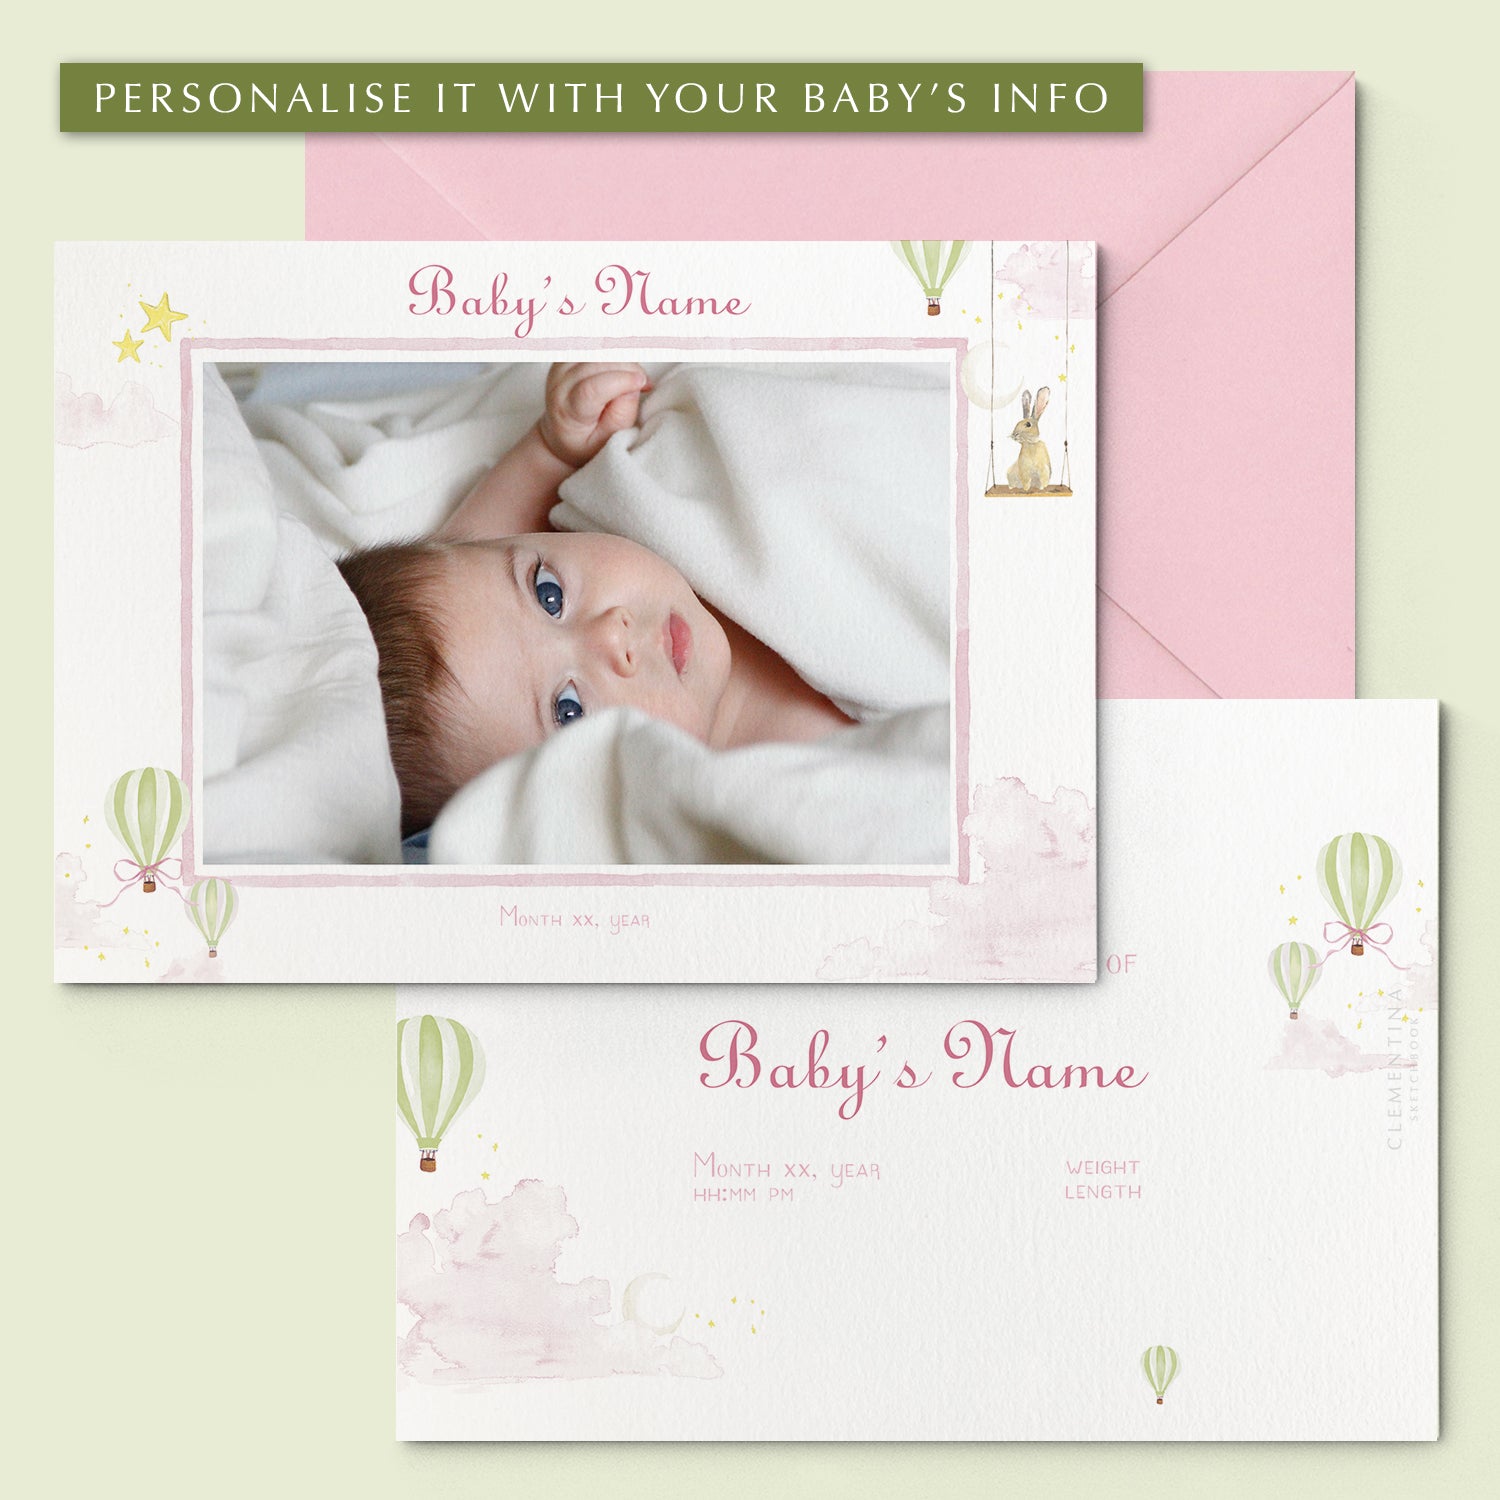 Hot Air Balloons Printed Birth Announcements - With Photo - 01